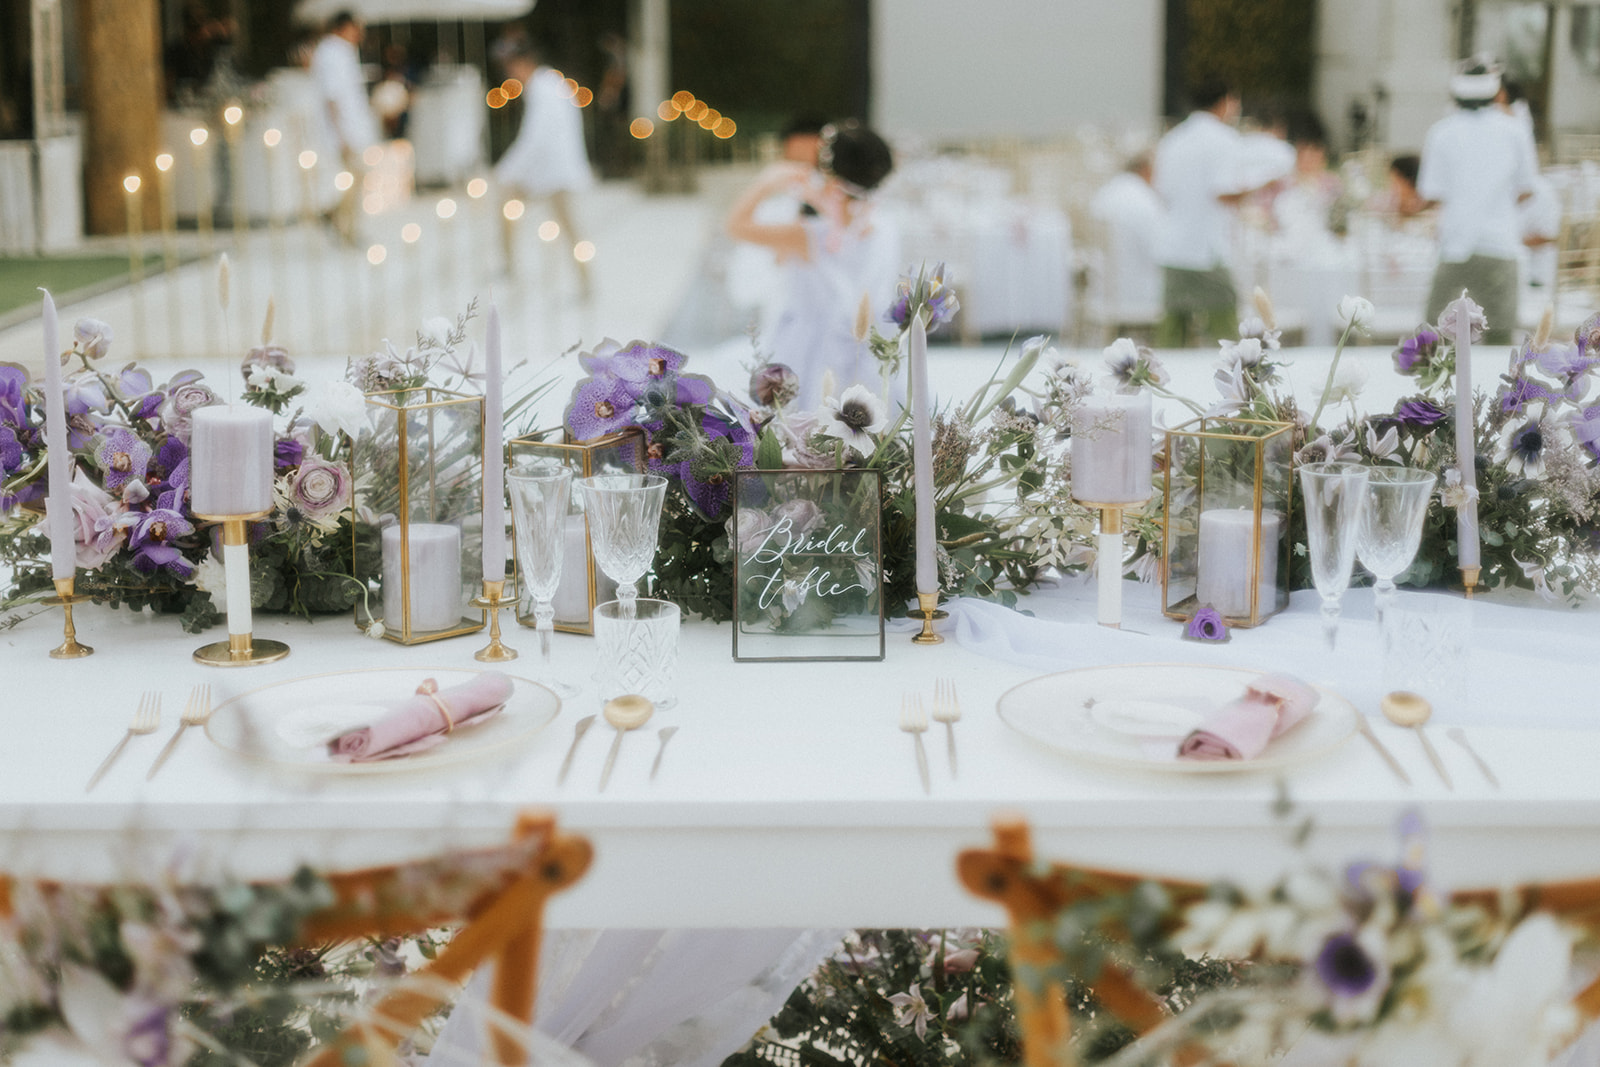 Romantic wedding decoration where love takes center stage.